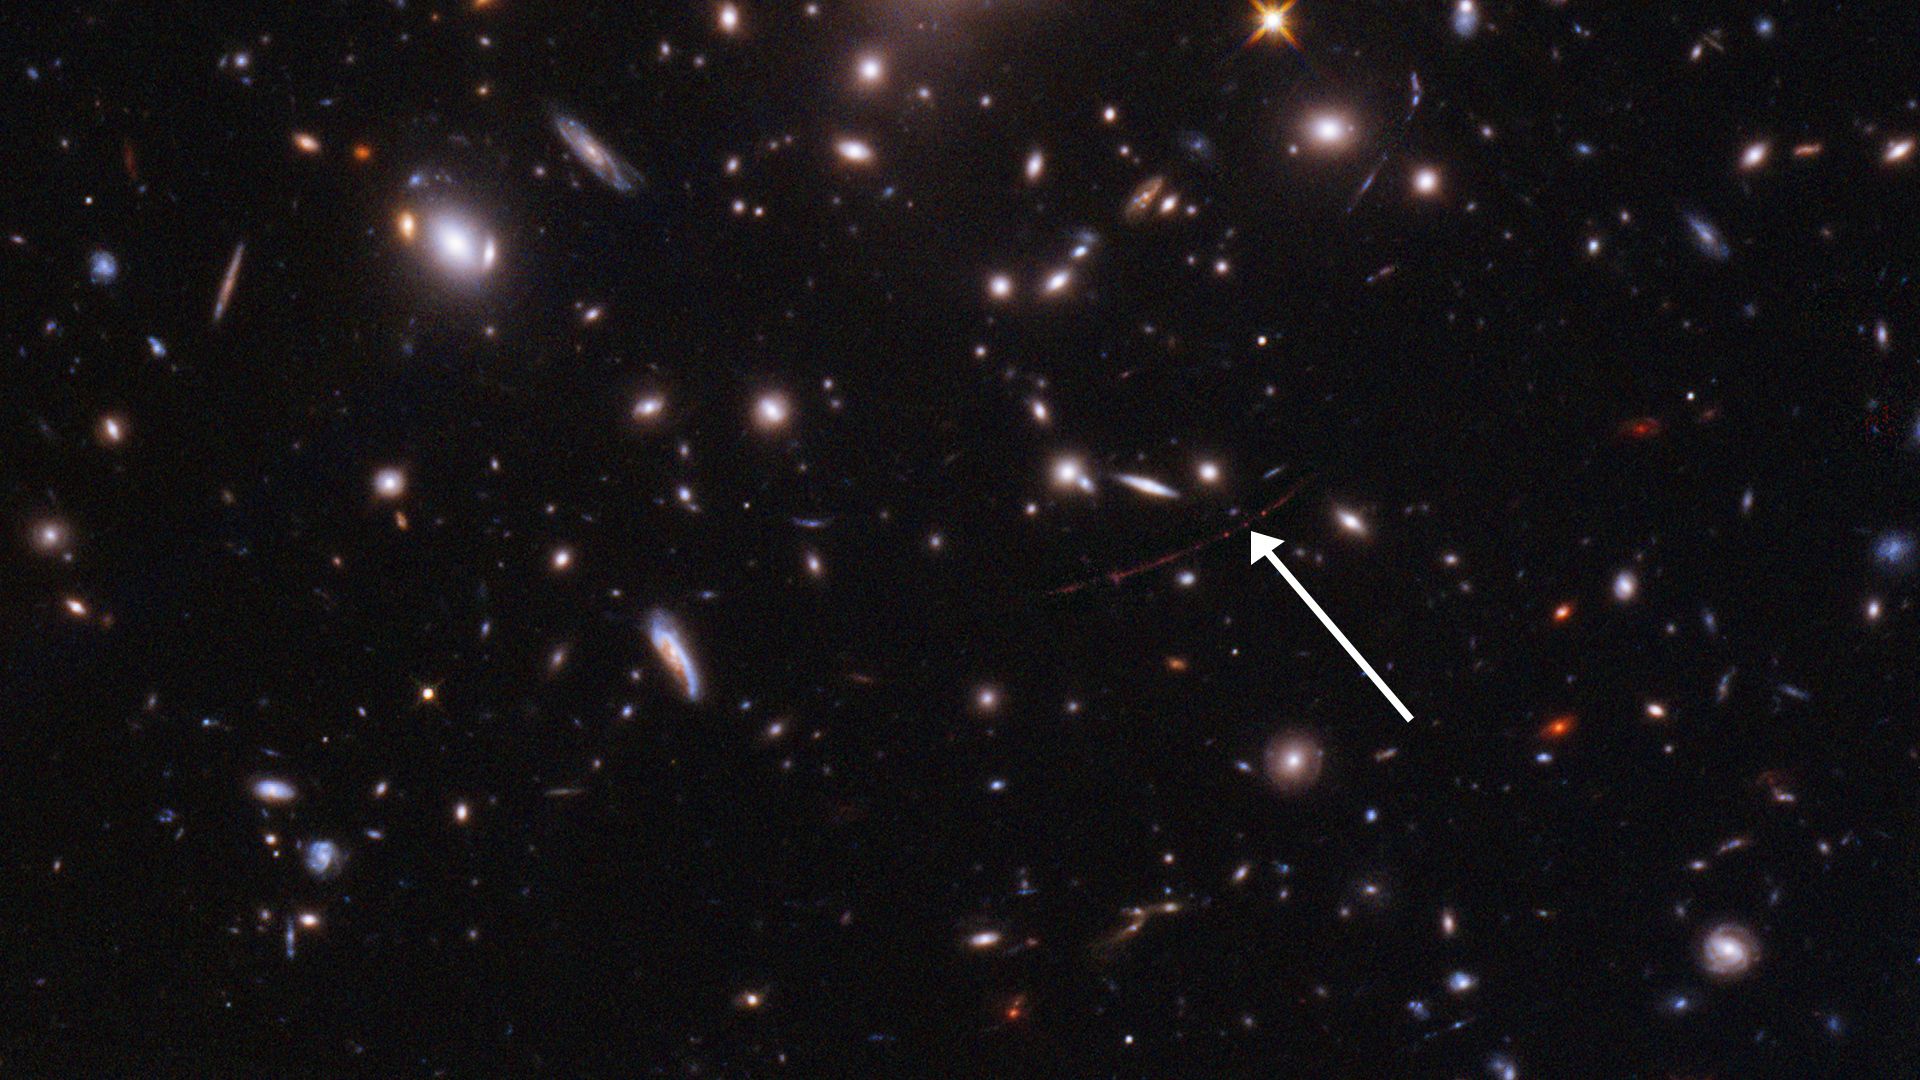 Deep space image of galaxies and arrow pointing to newly detected star 